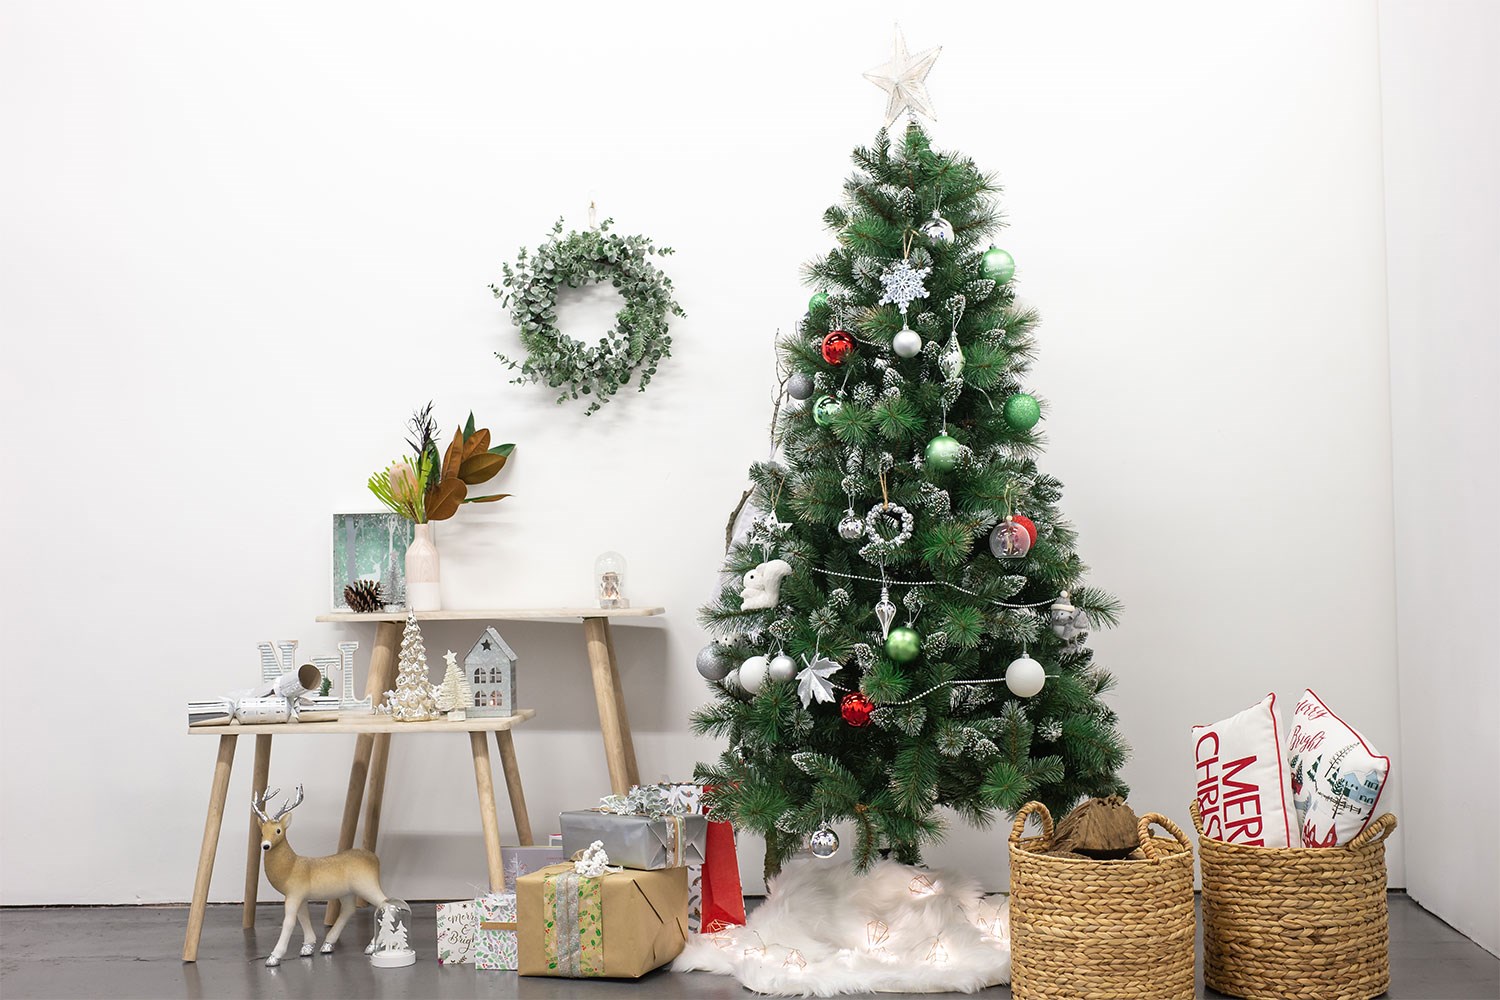 Big W Christmas decorations, crafts, hacks & ideas for 2018  Better